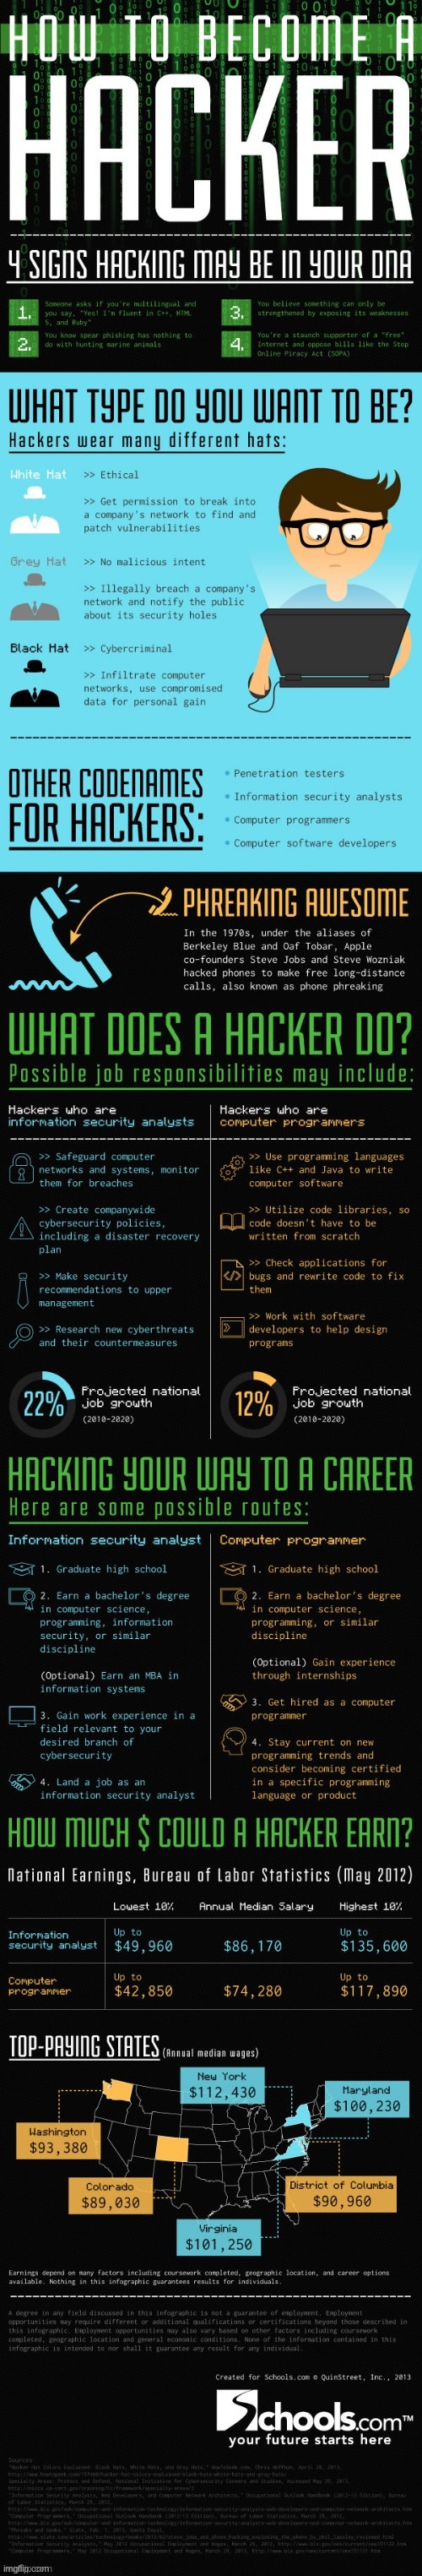 I was specifically thinking of Mr. Jaws when posting this computer-hacking infographic, honestly... | image tagged in simothefinlandized,tutorial,infographic,computers,hacking,repost | made w/ Imgflip meme maker